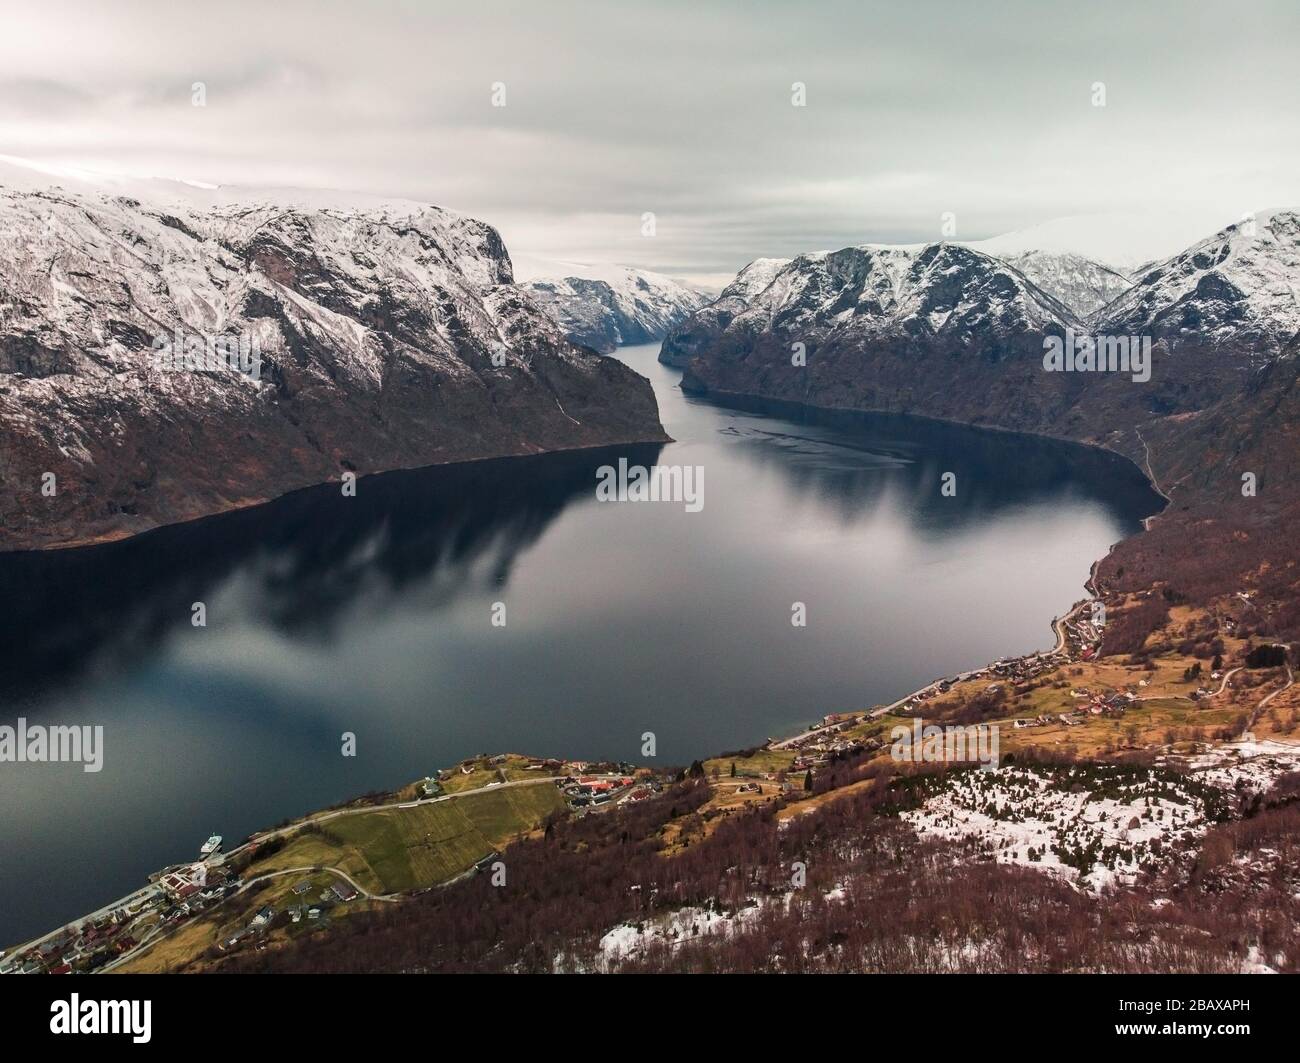 View of an Aurlandsfjord in Norway. Stock Photo